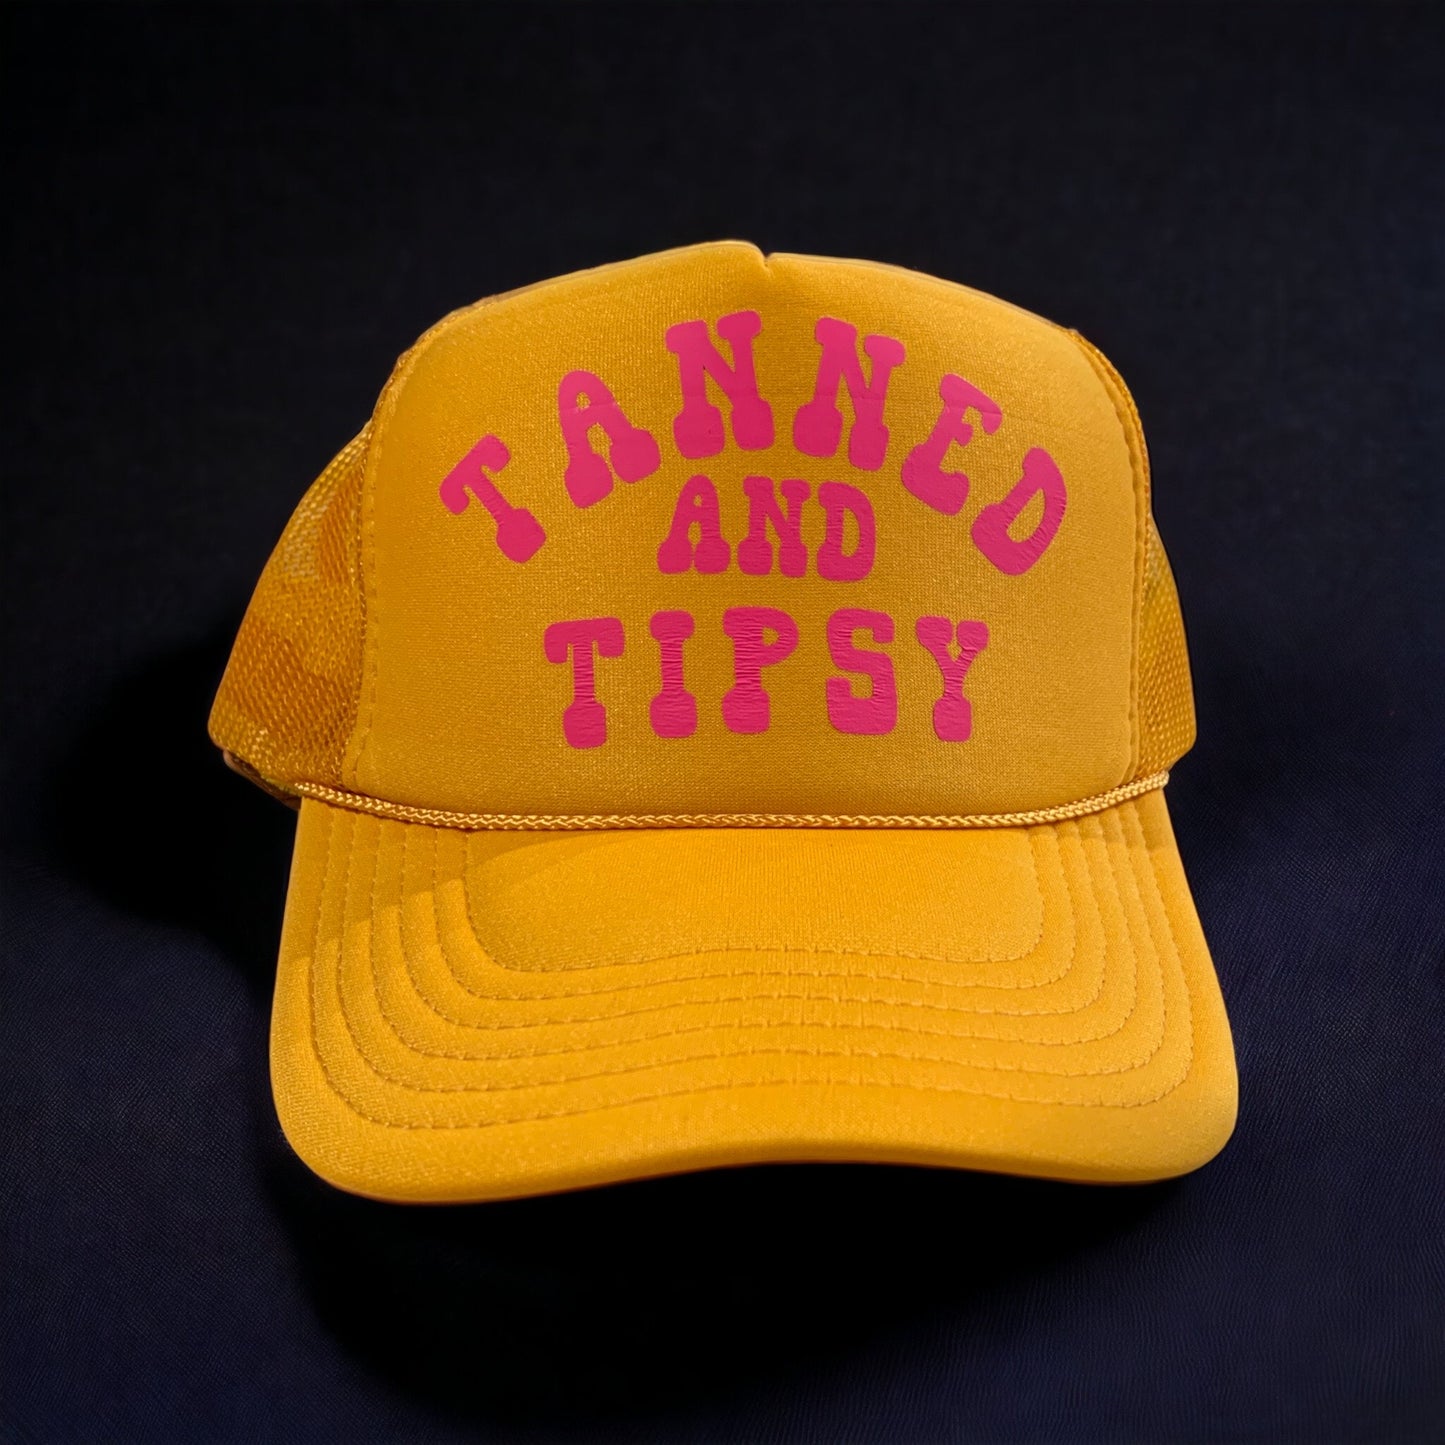 "Tanned and Tispy" Trucker Hat